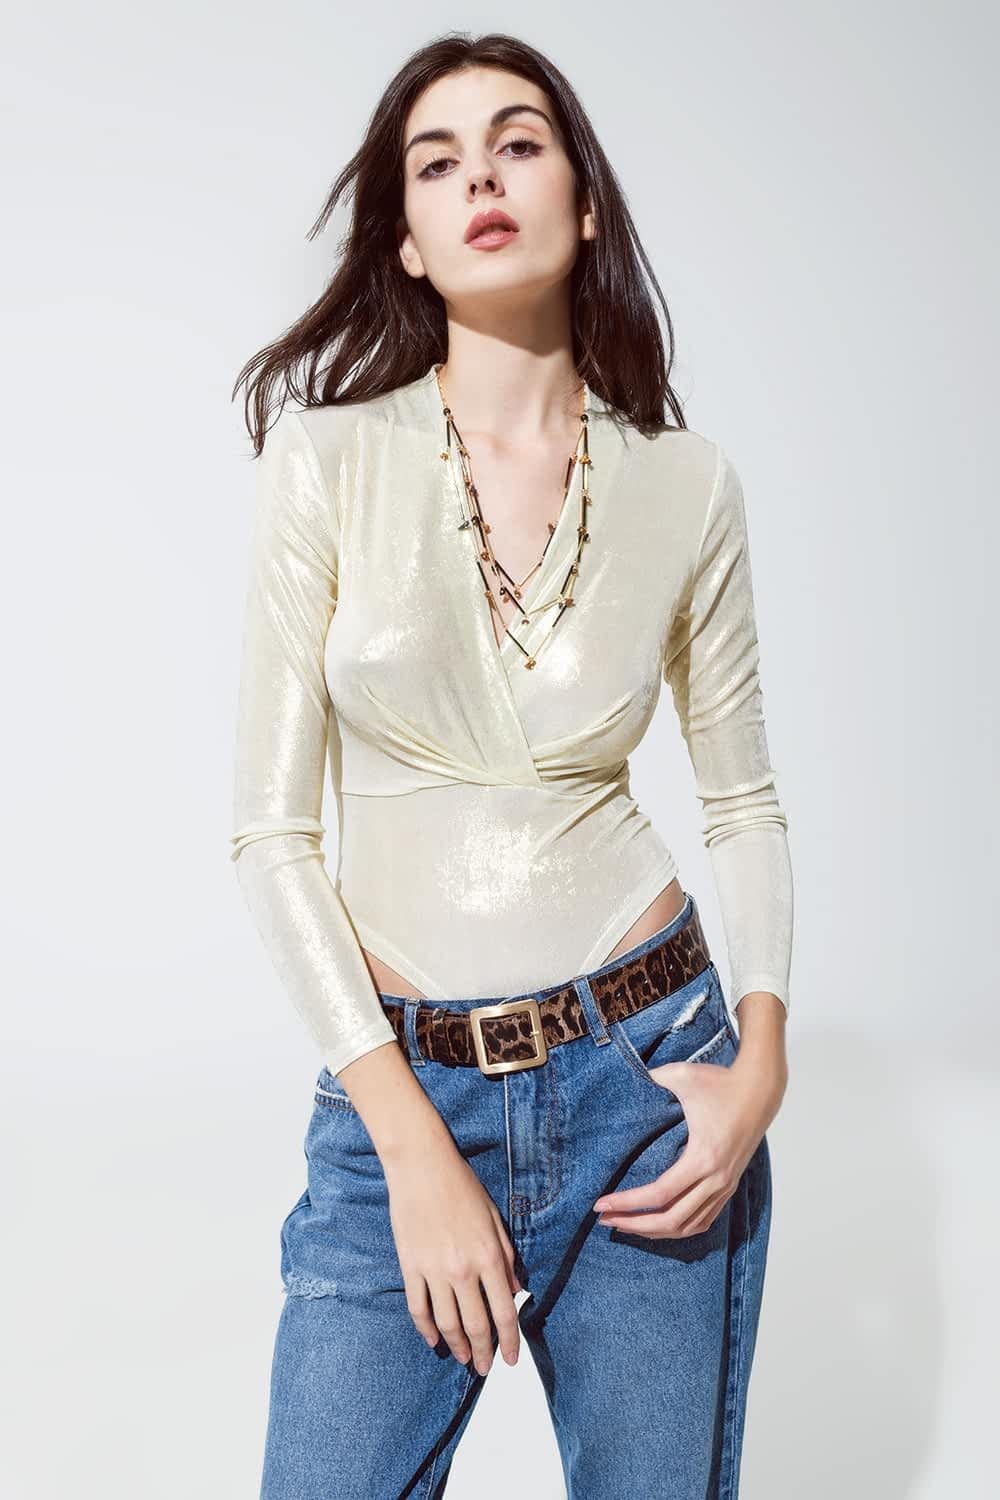 Q2 Women's Blouse Metallic Finish Bodysuit With Draped Details In Pearl White